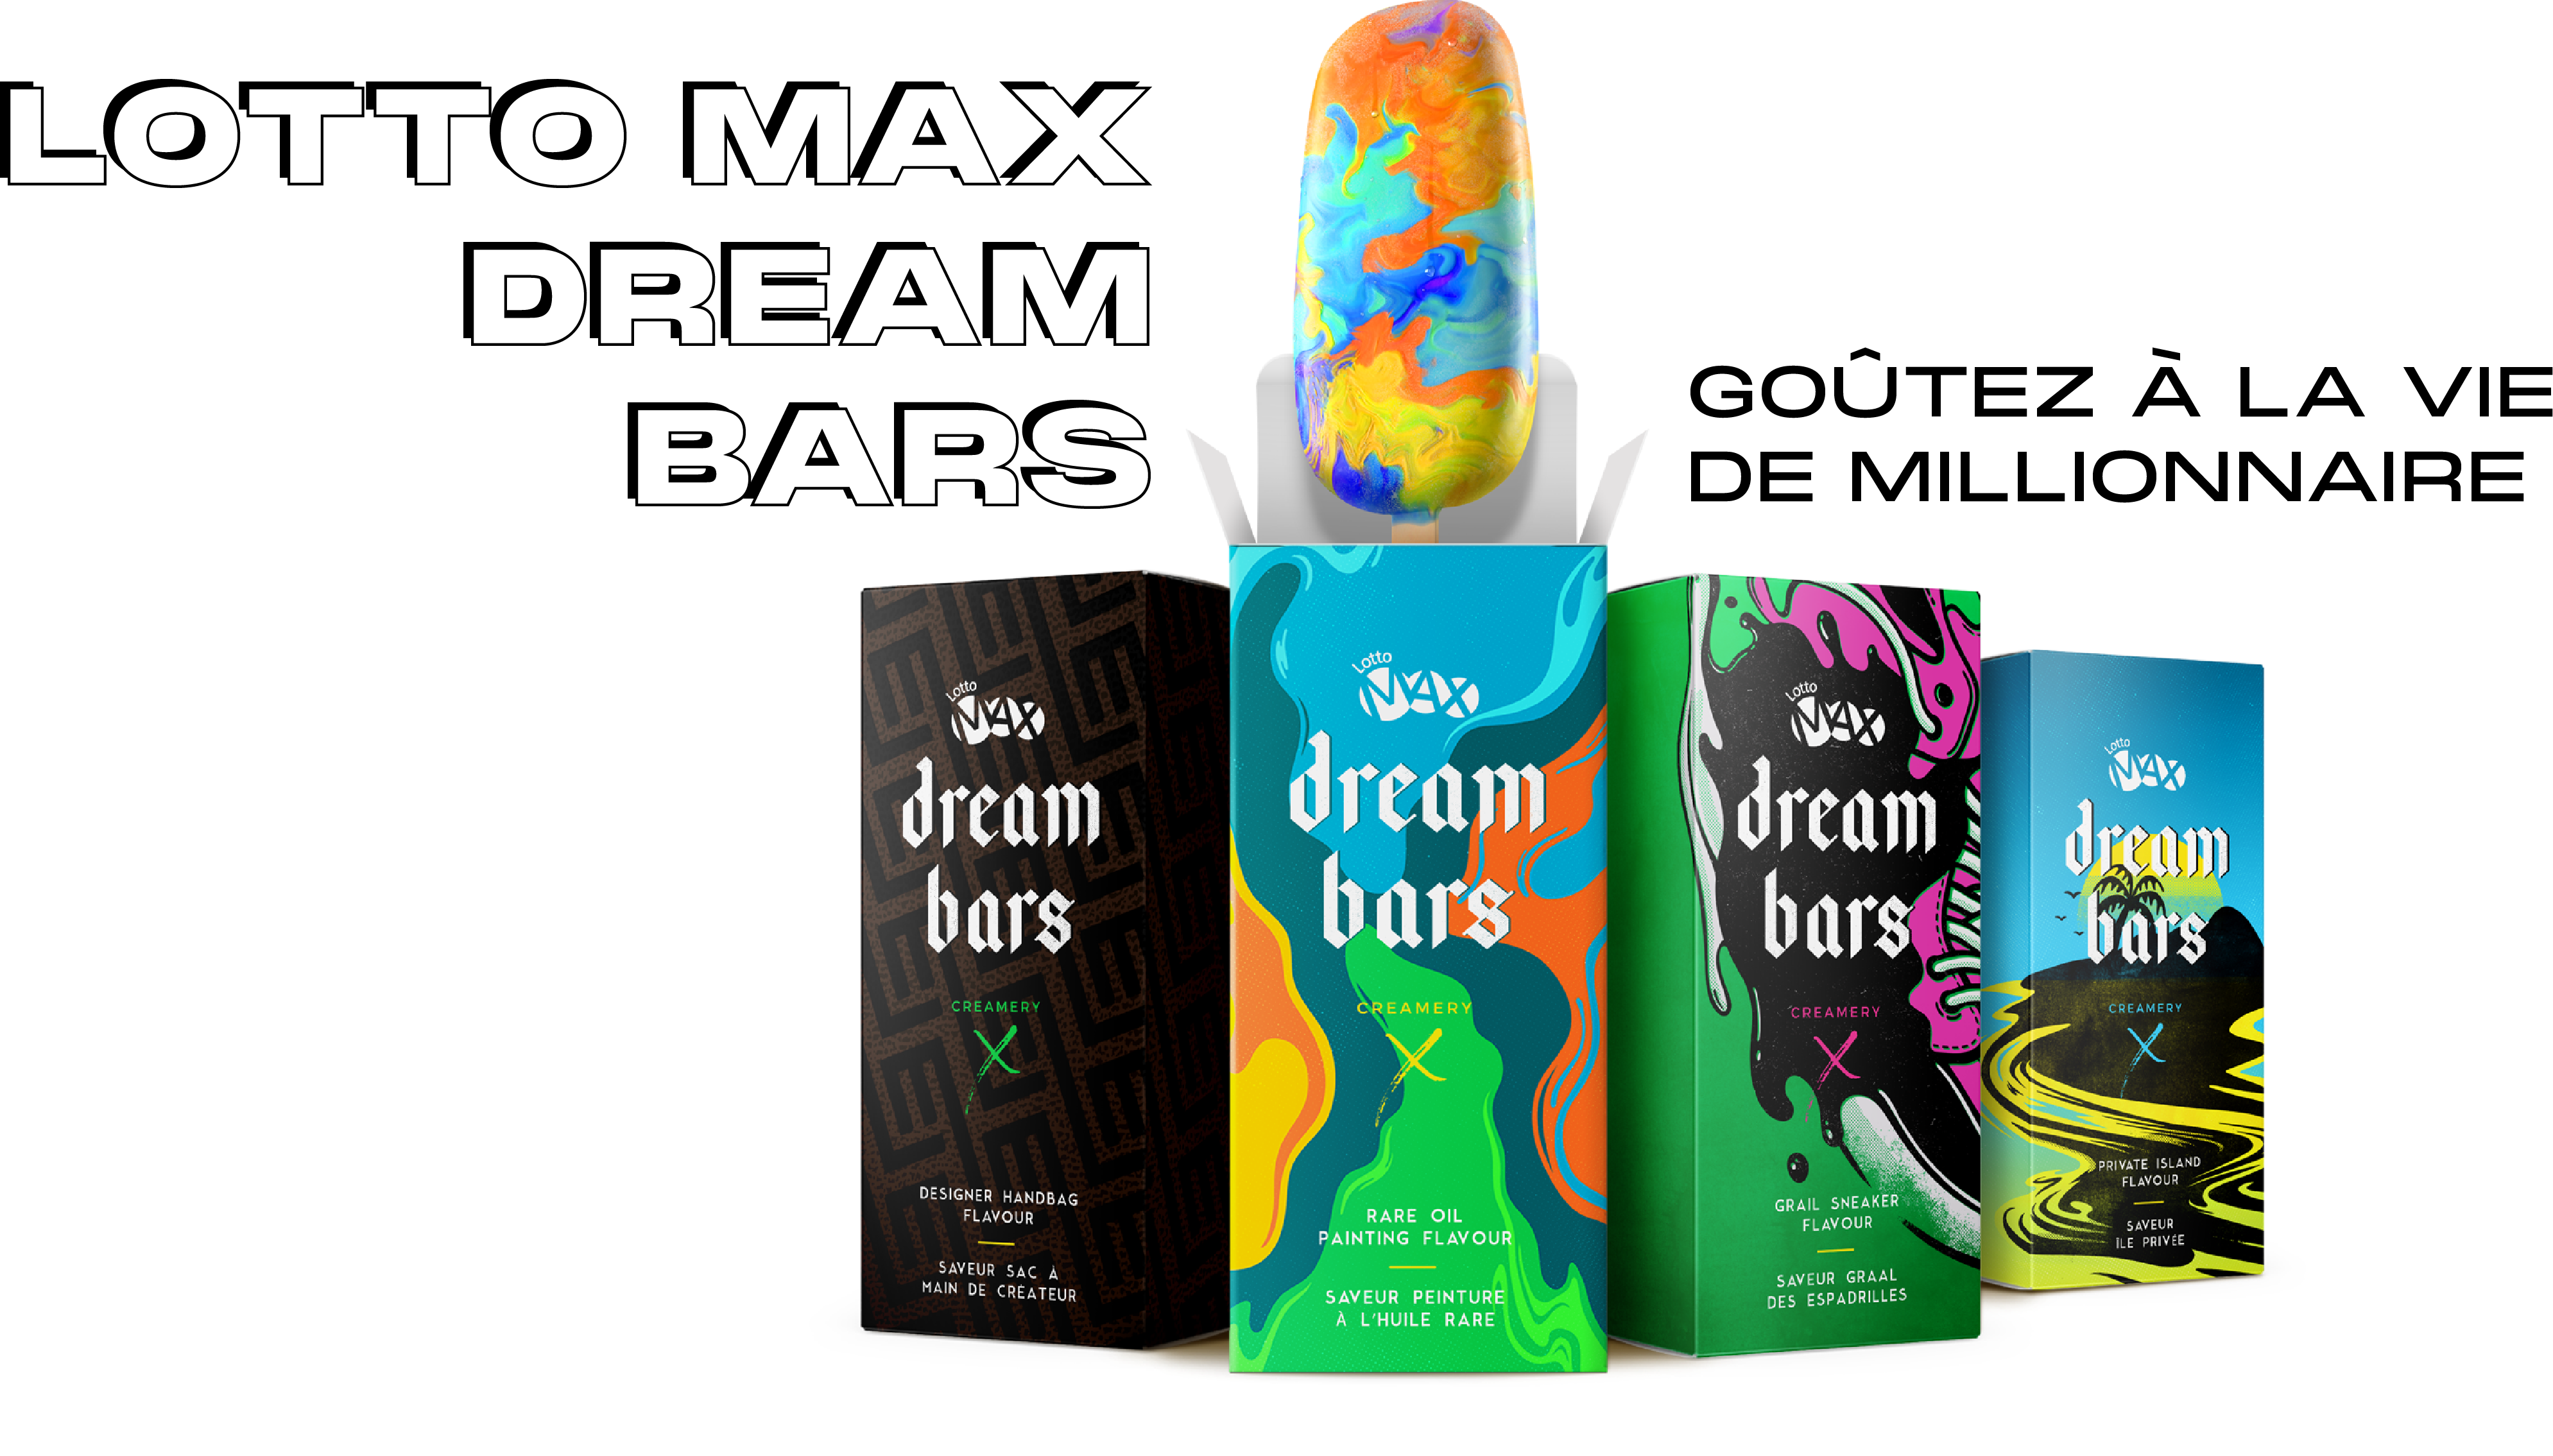 LOTTO MAX DREAM BARS. Get a taste of the millionaire life